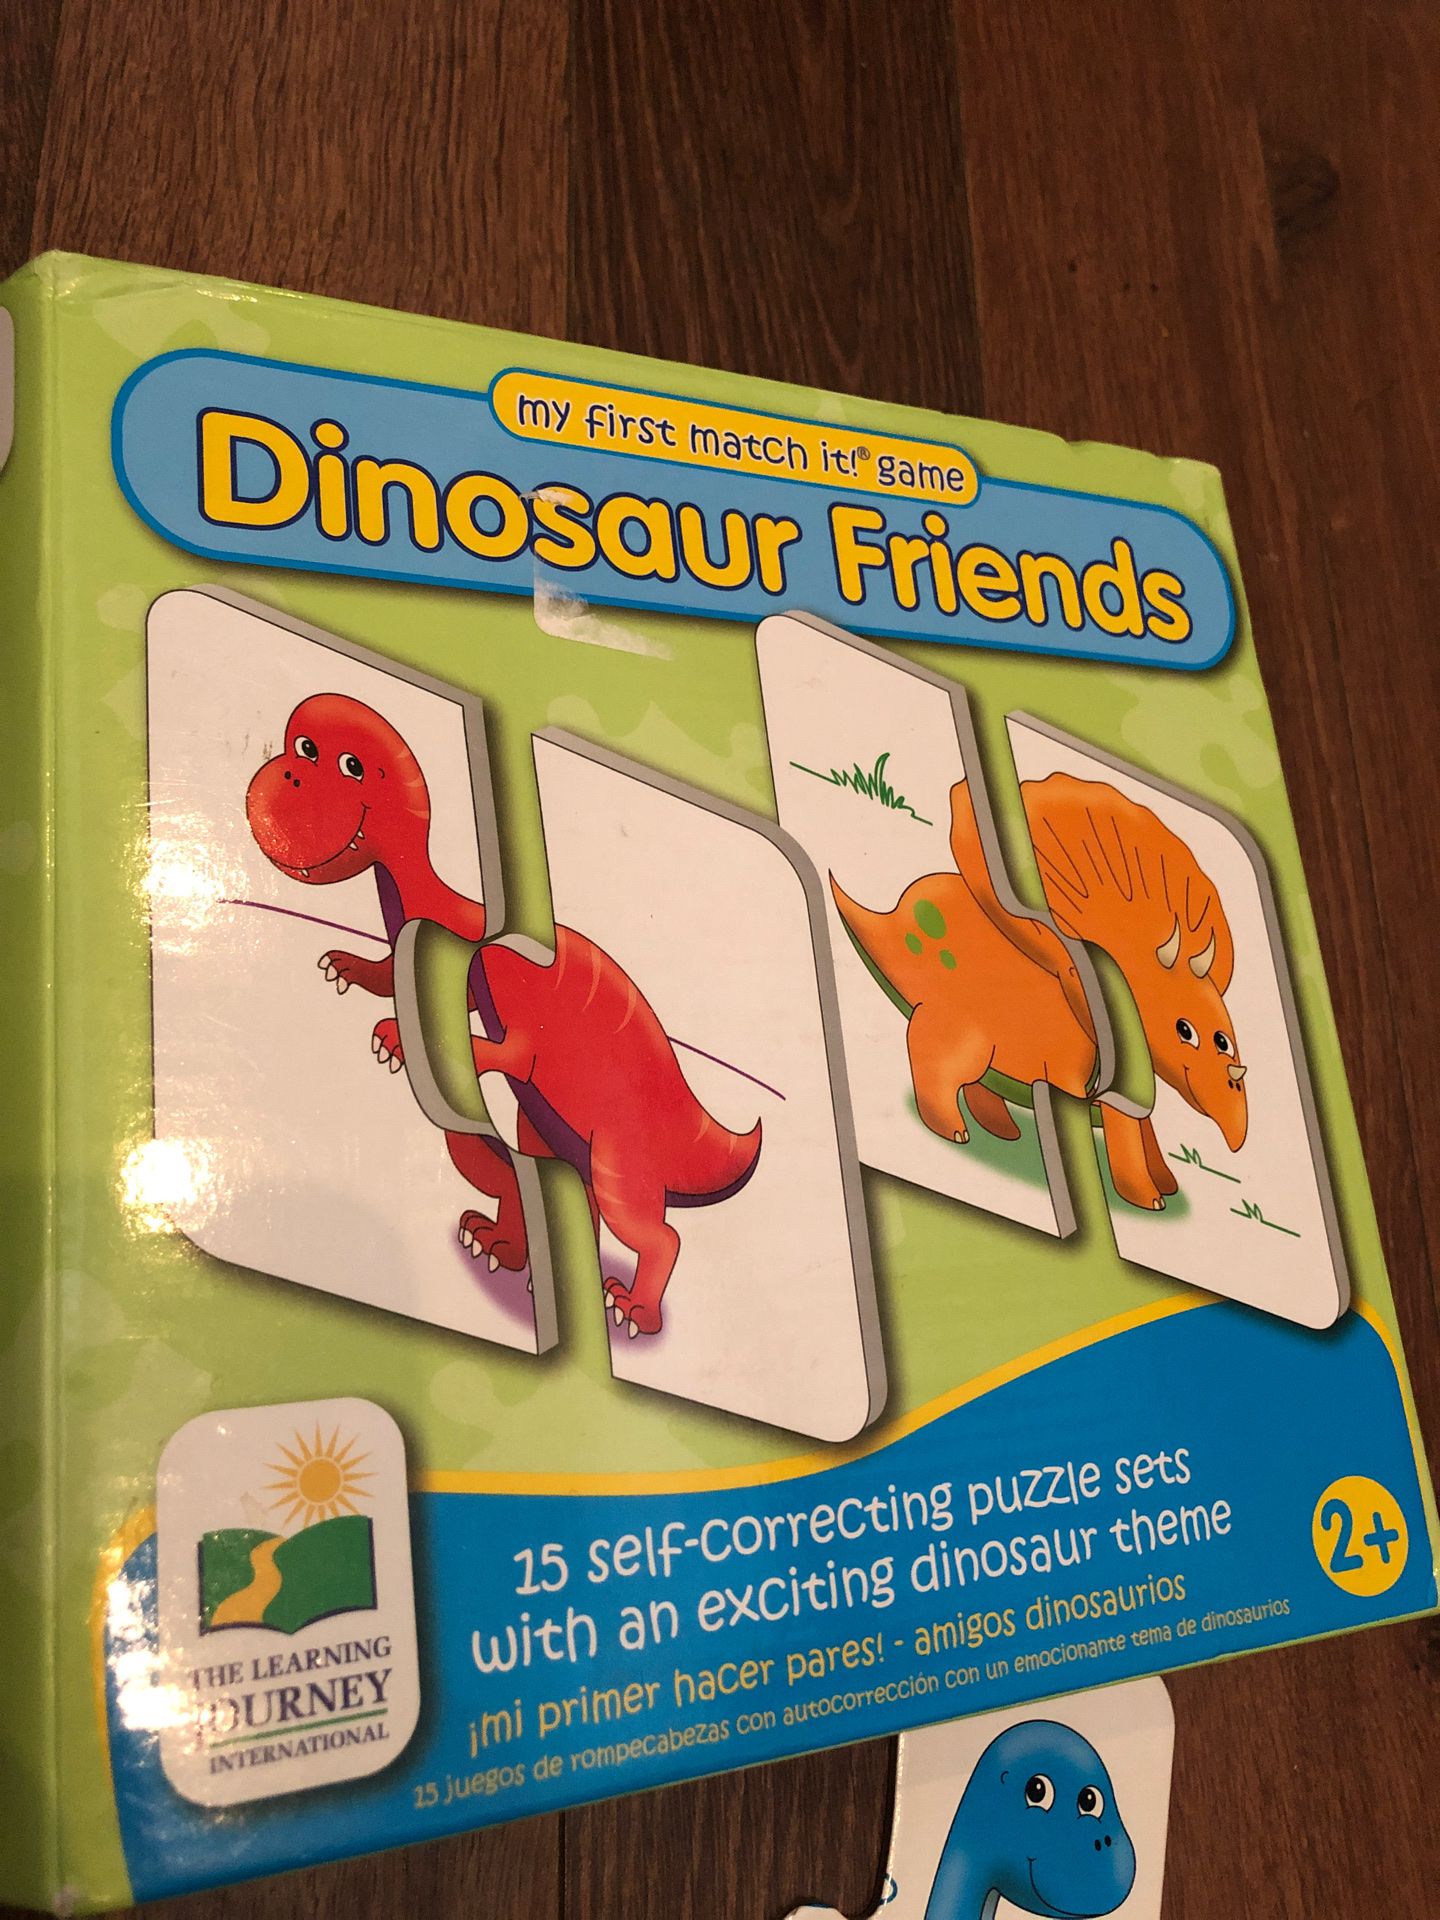 Dinosaur friends matching Puzzle sets - from the learning journey - Preschool - homeschool